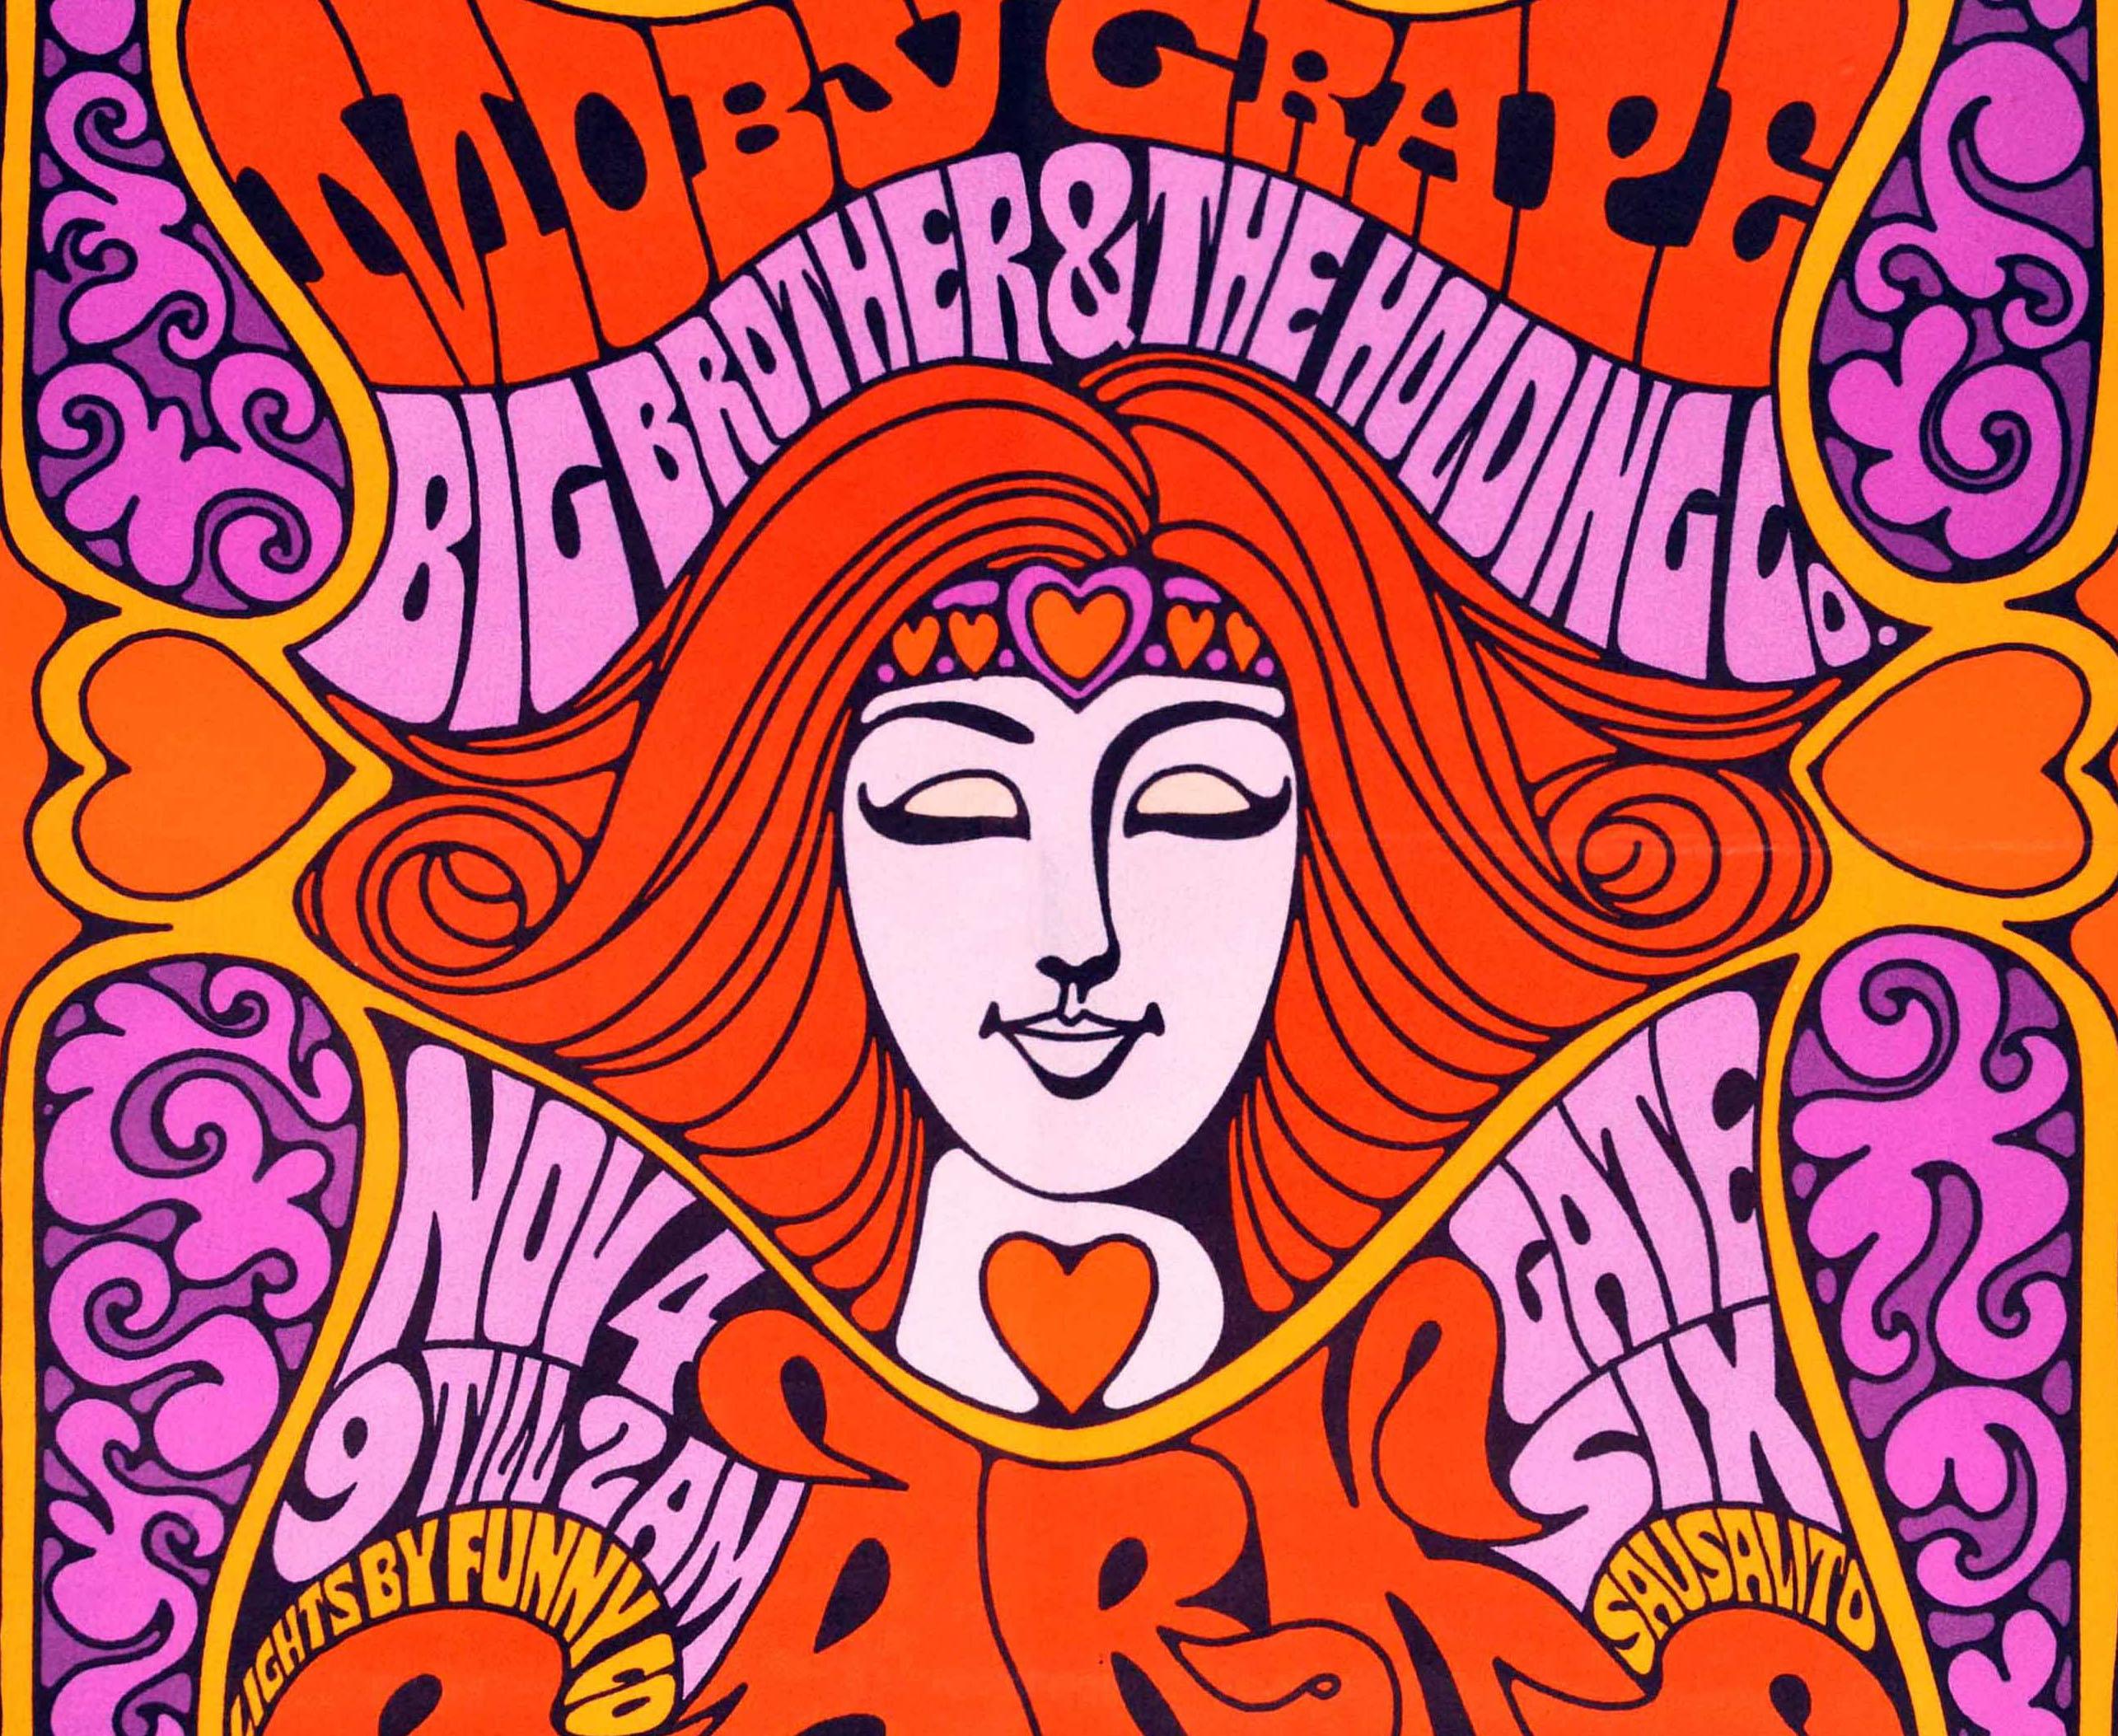 Original vintage music poster for the Dance Concert Moby Grape Big Brother & The Holding Co. held on 4 November from 9 till 2 am at the Ark featuring a colourful psychedelic flower power style illustration of a red haired hippy lady wearing a heart